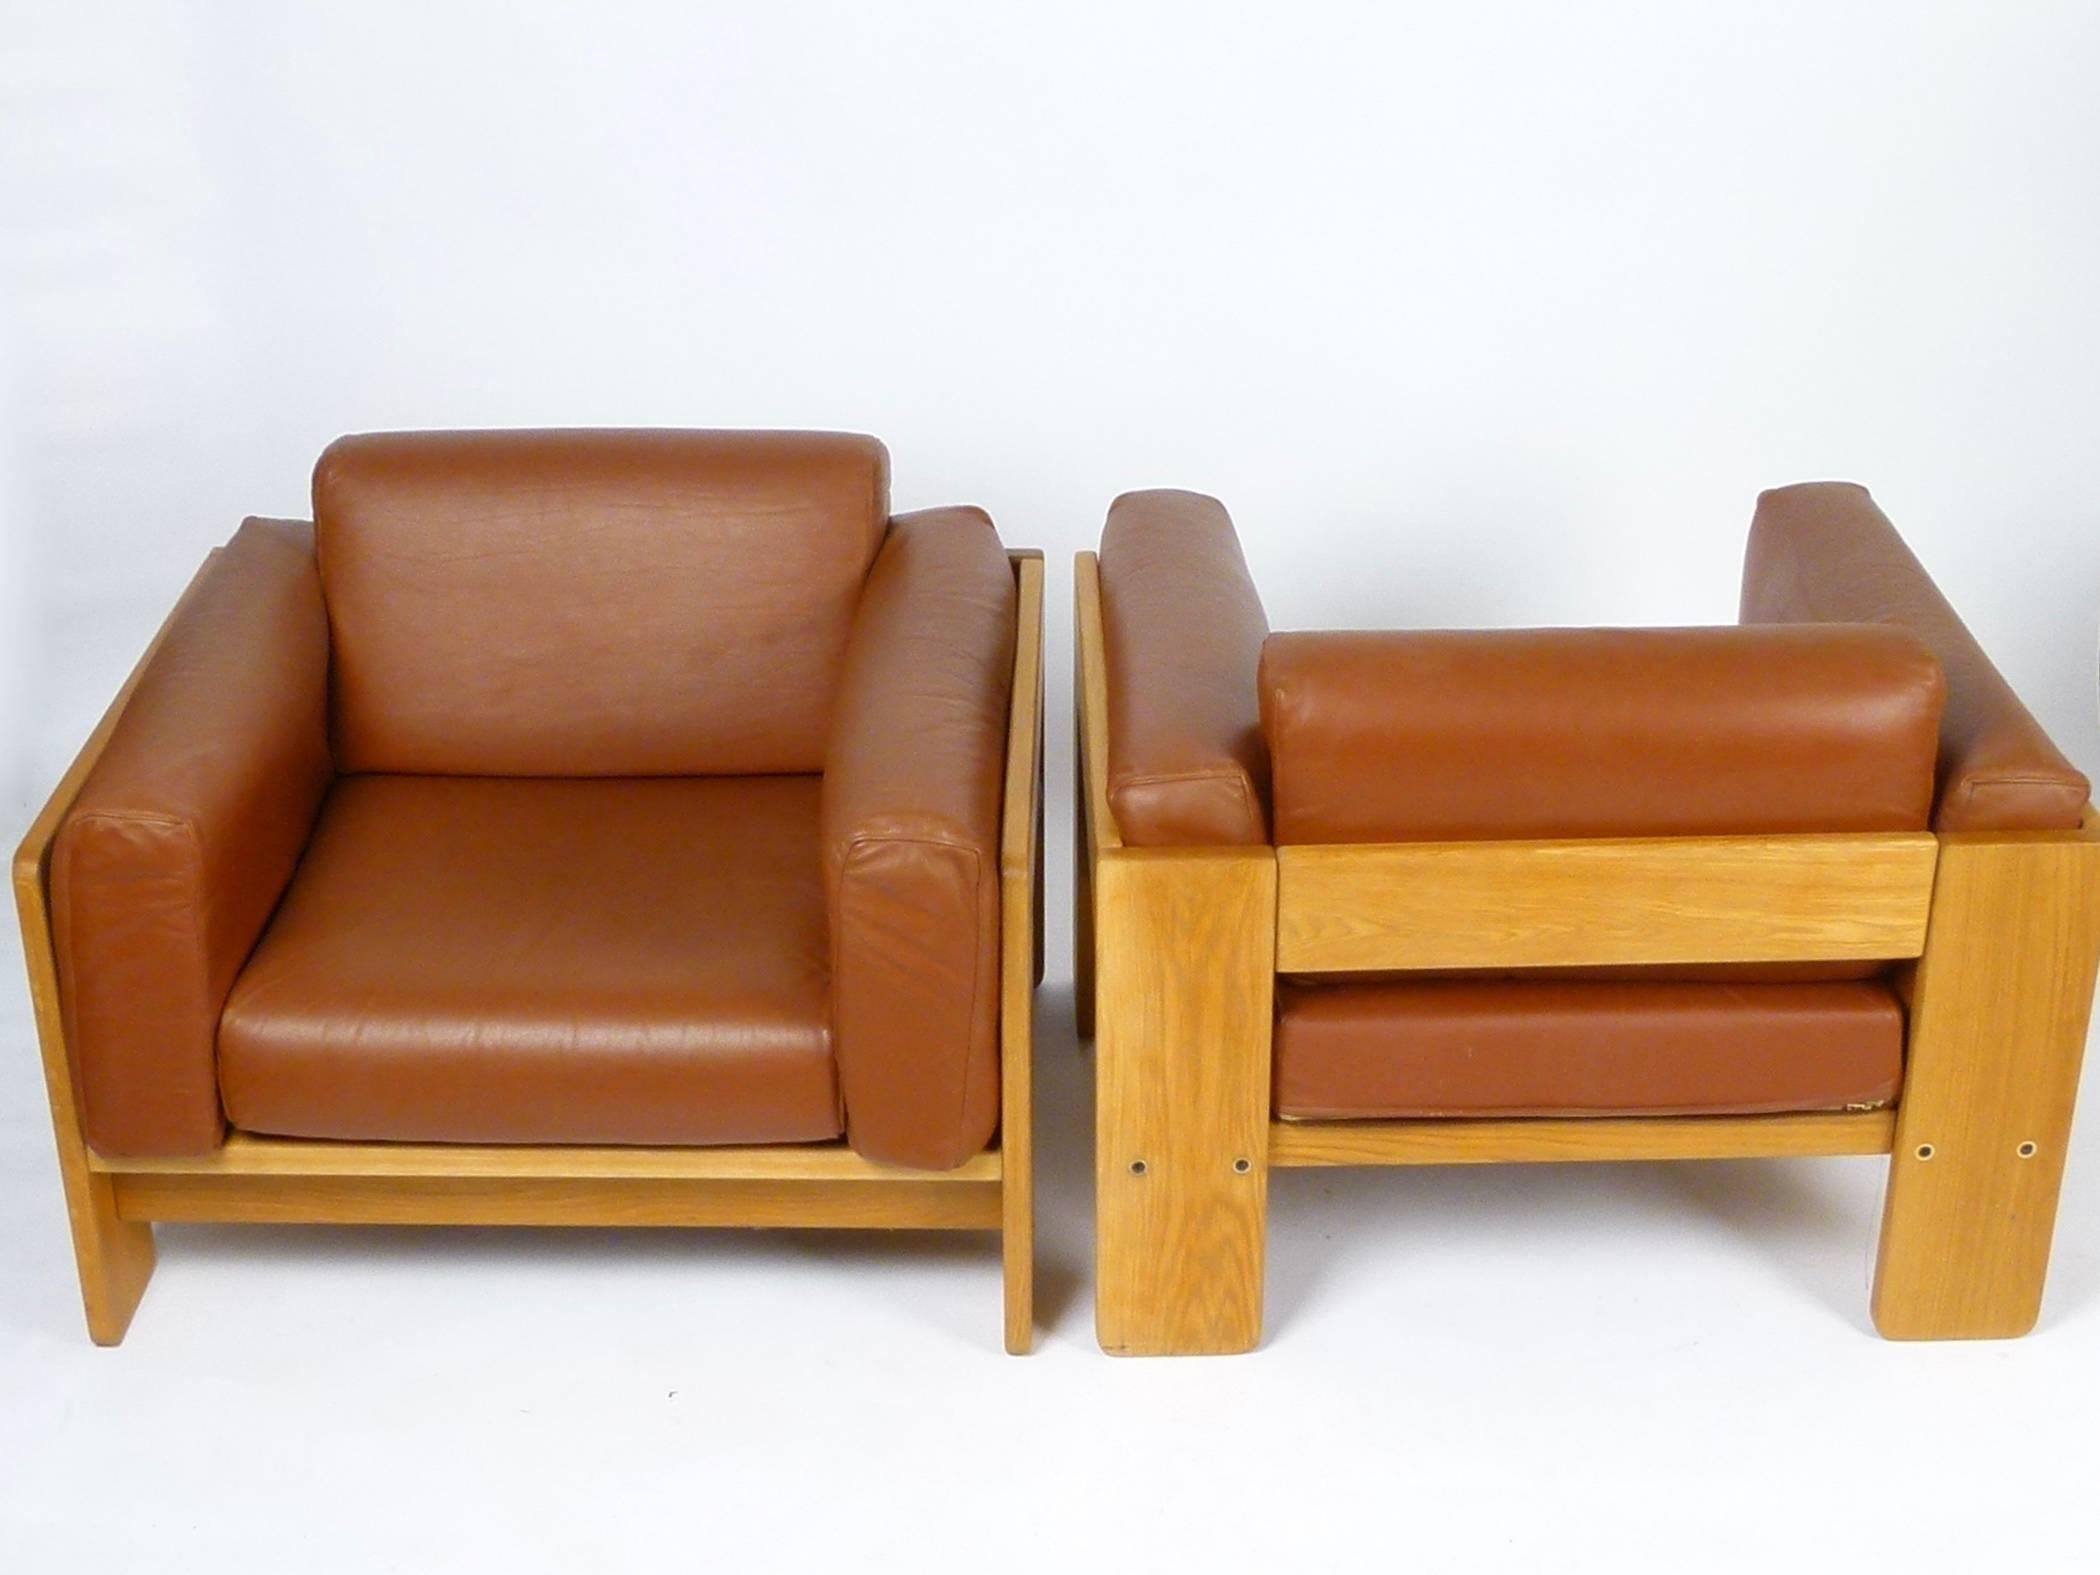 Pair of iconic 1970s leather and oak 